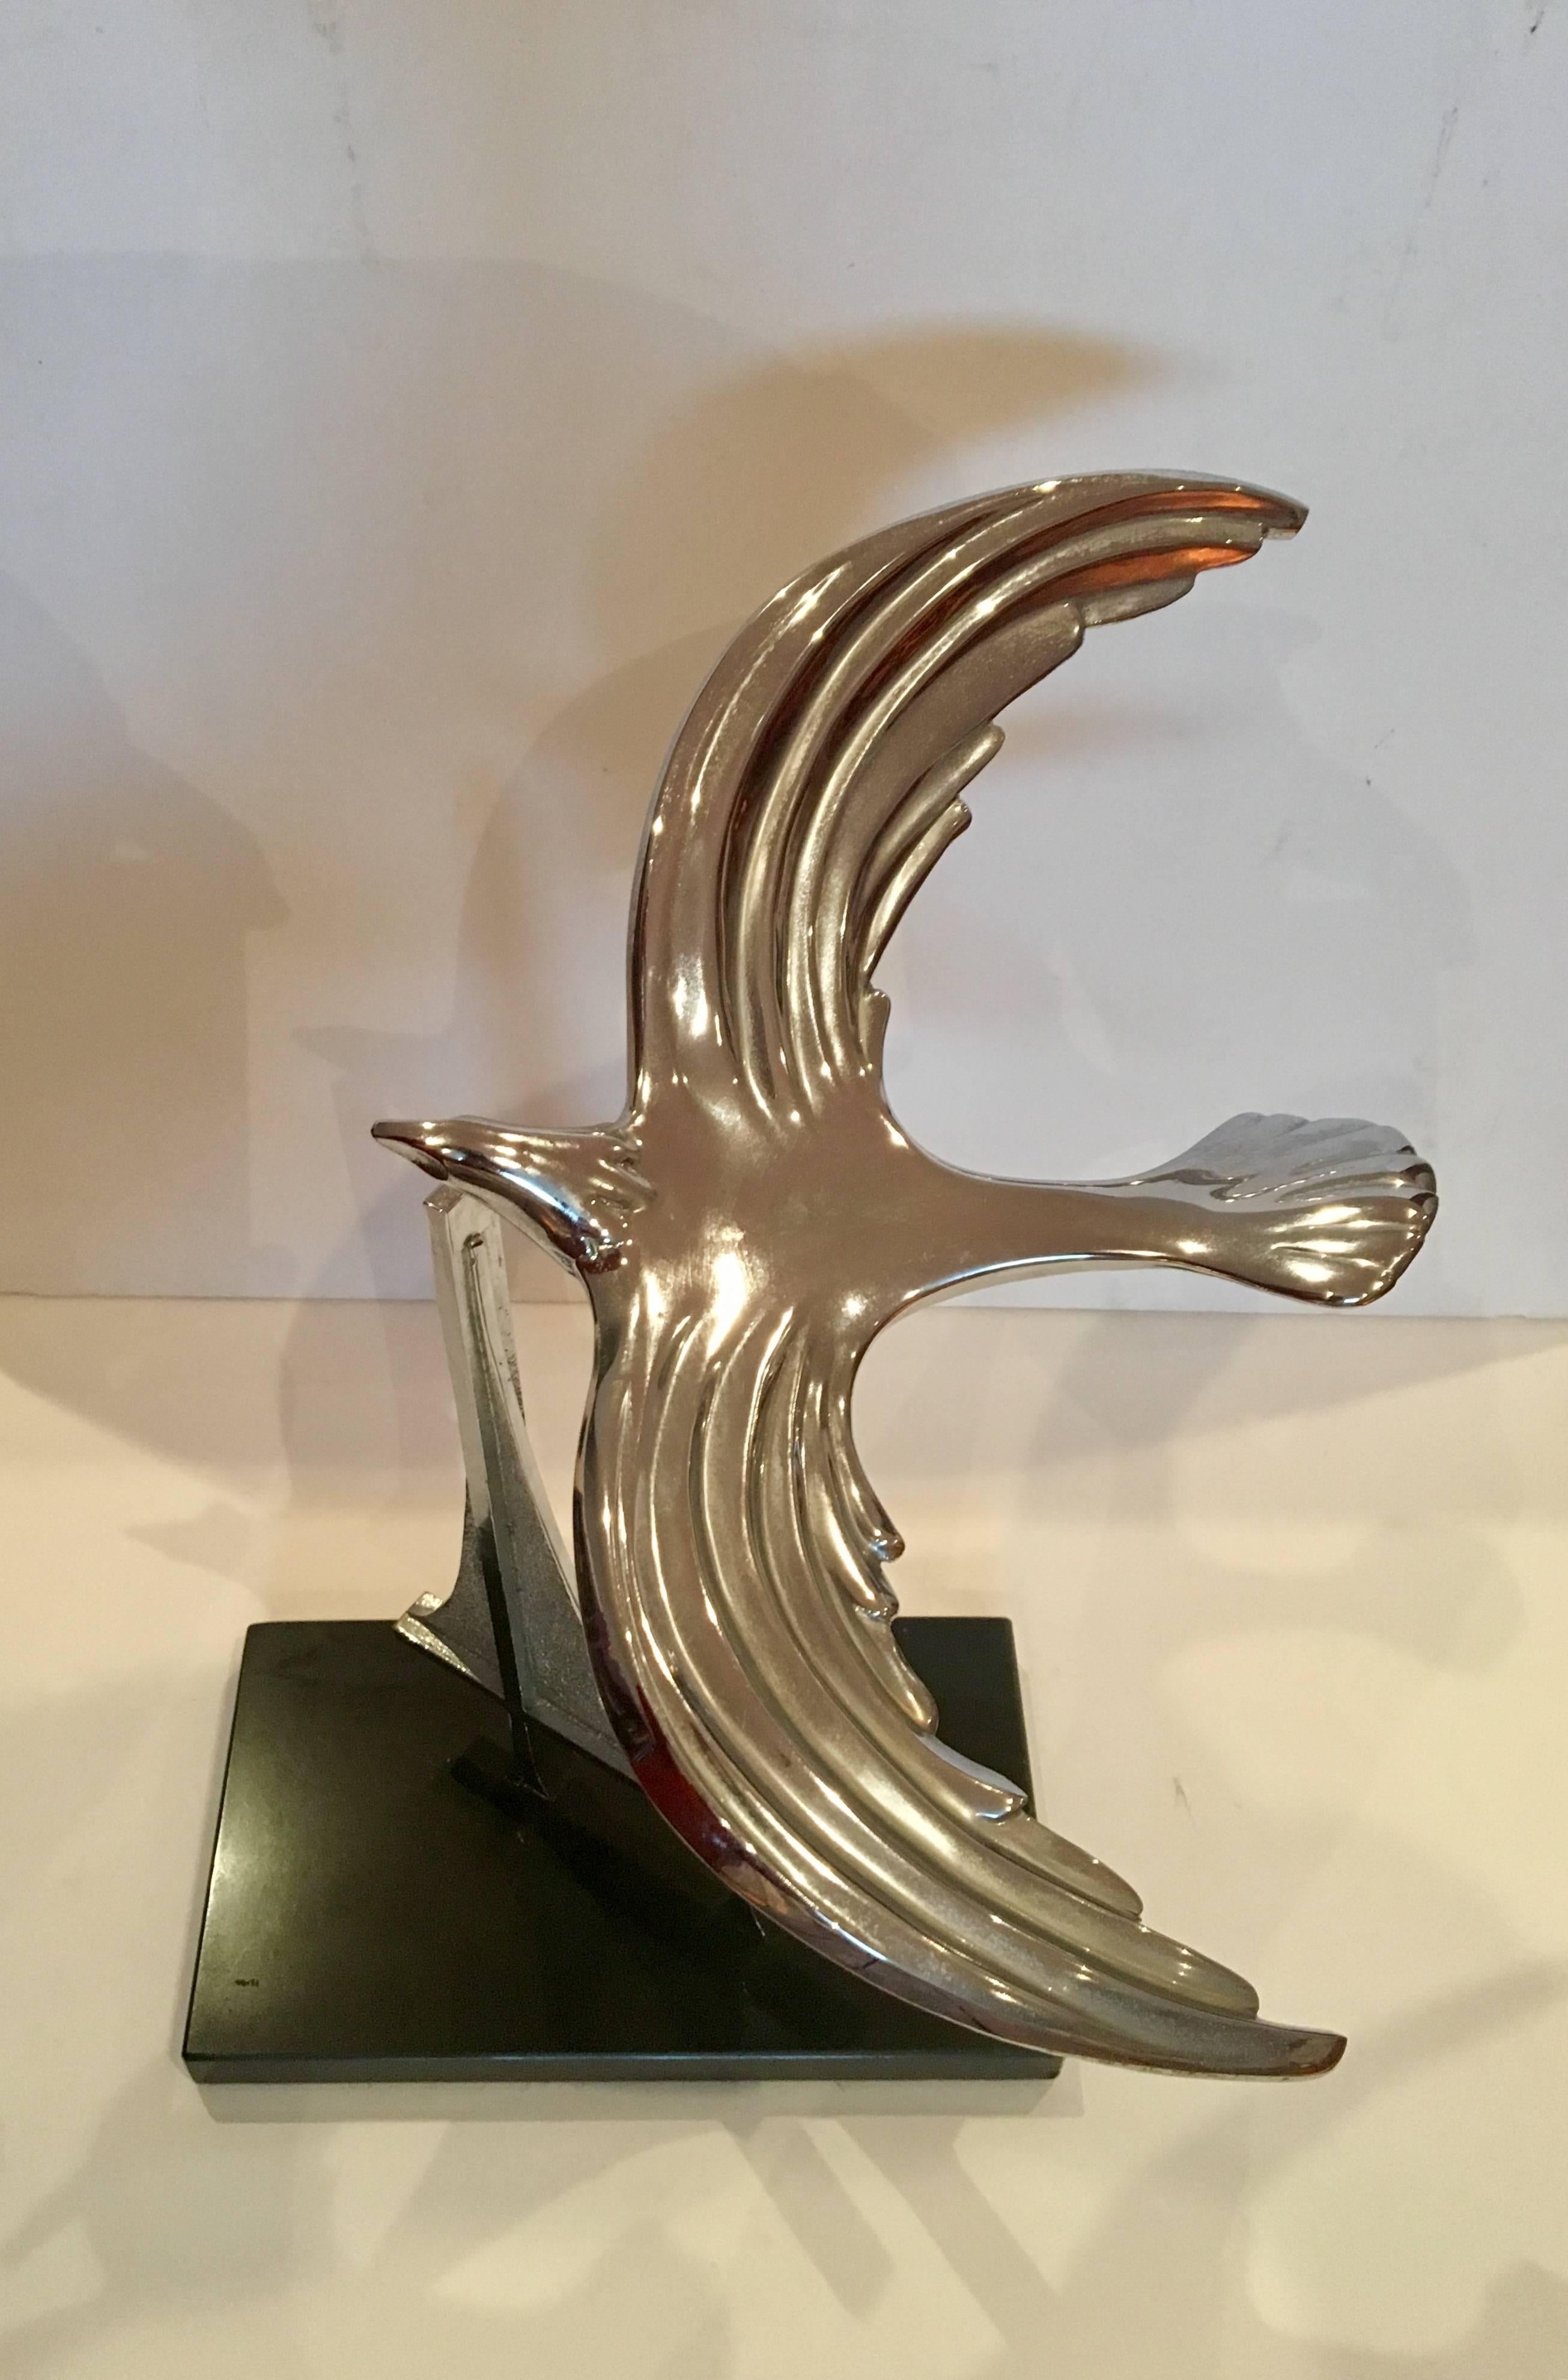 Nice sculpture by M K Shannon, engraved at the bottom by the artist dated 1986 and numbered 293/350, in chrome finish sitting on black marble base.